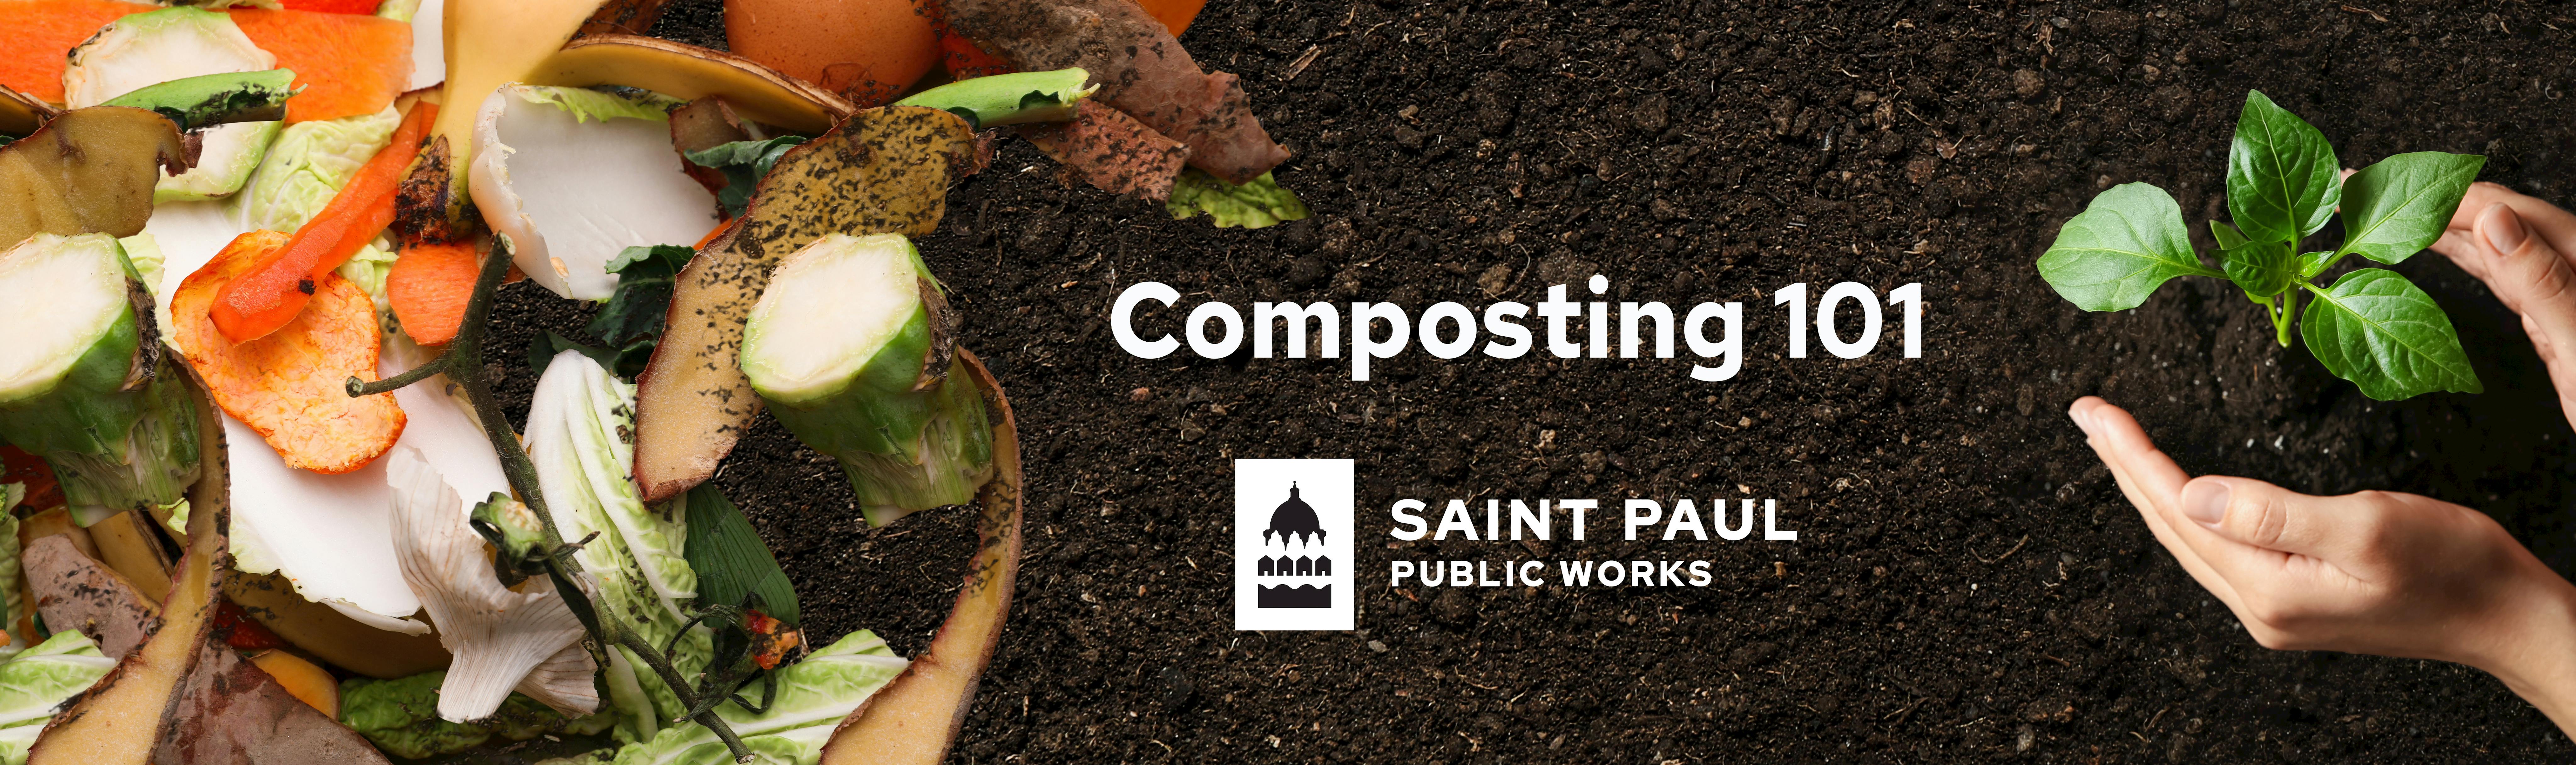 Food Waste to Compost